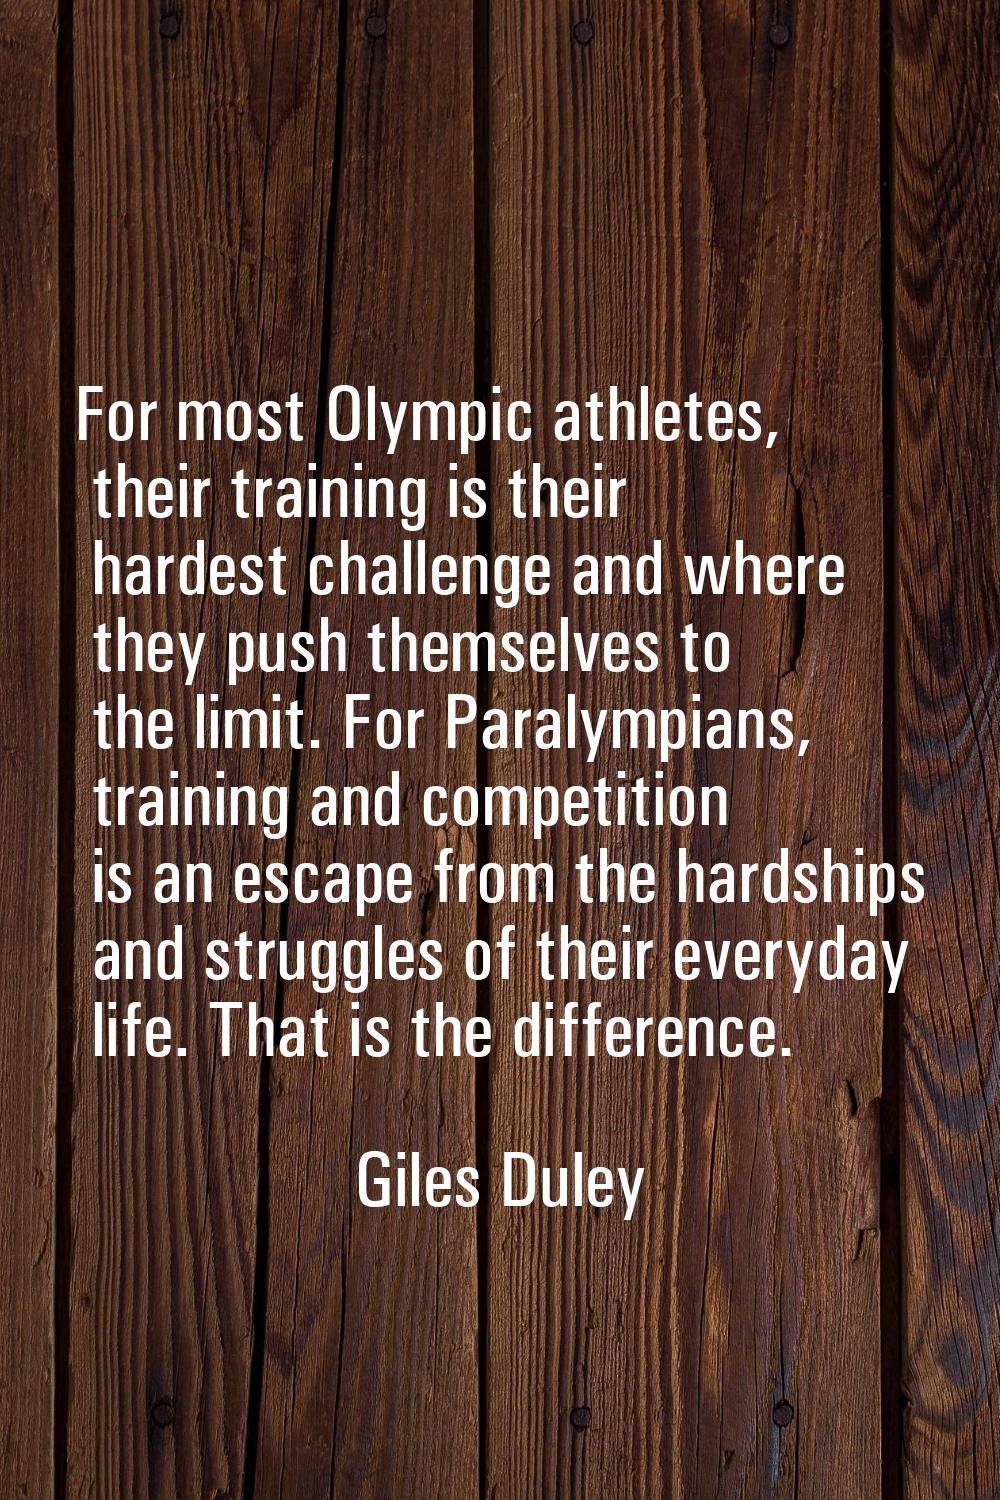 For most Olympic athletes, their training is their hardest challenge and where they push themselves